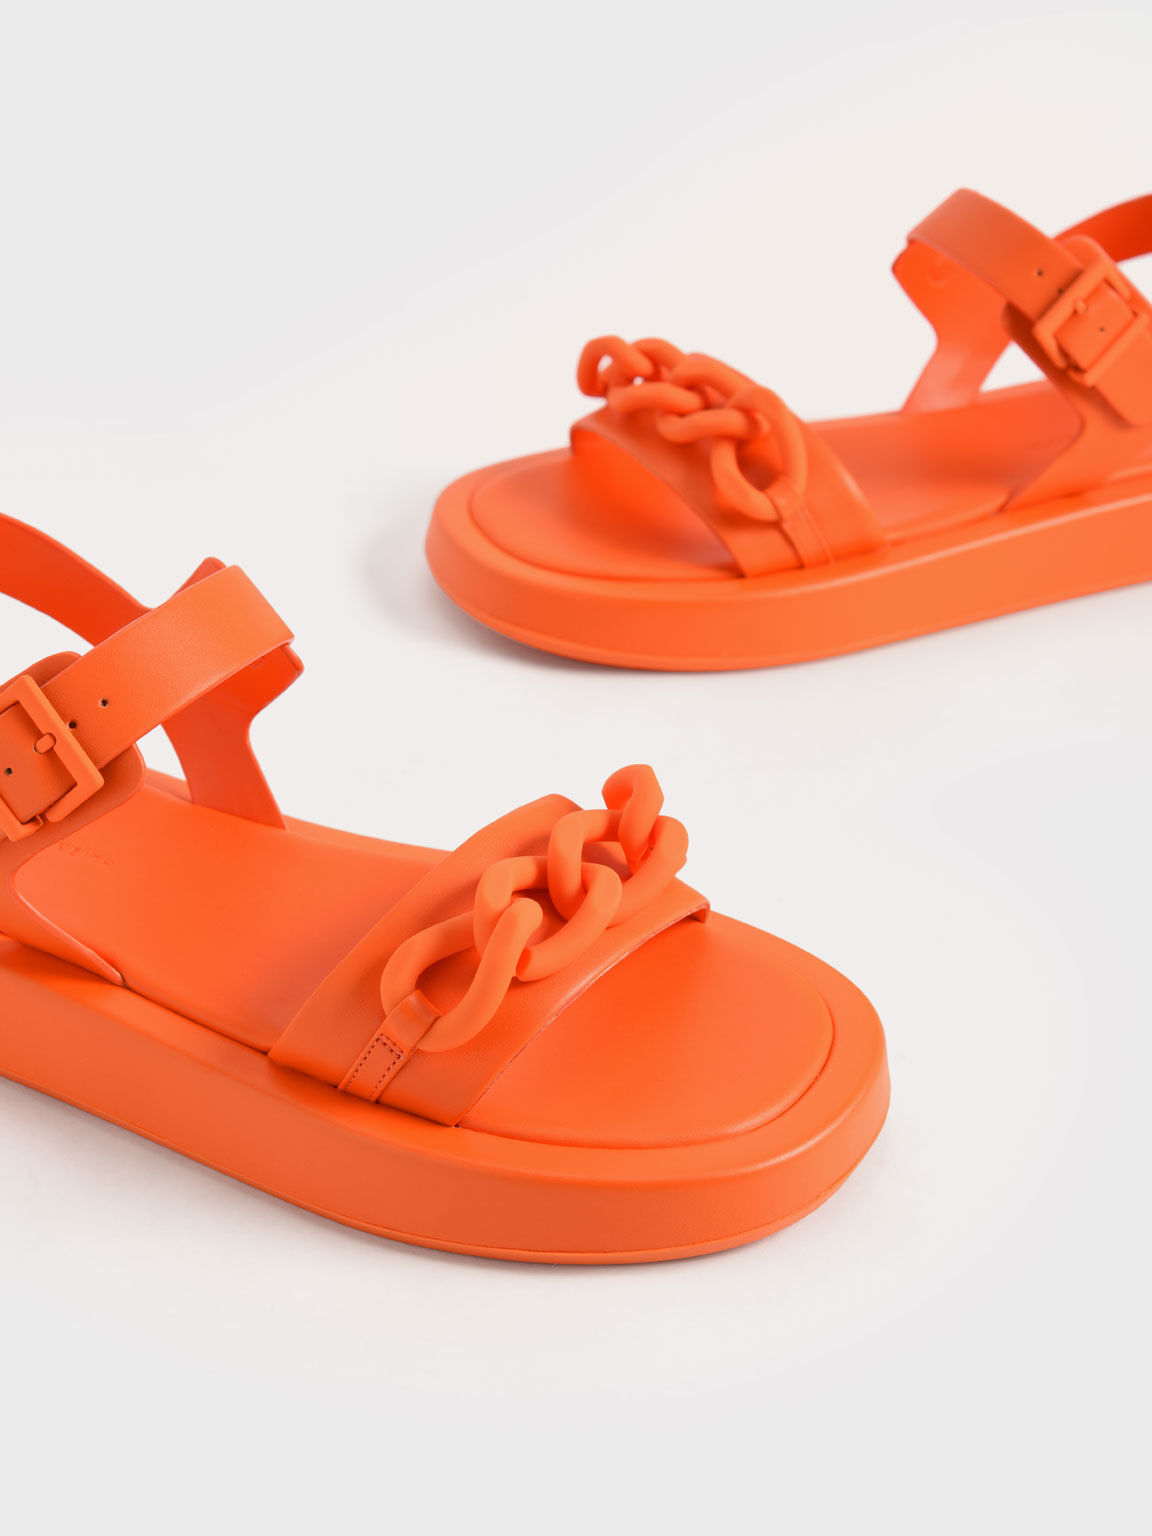 Chunky Chain-Link Ankle-Strap Padded Sandals, Orange, hi-res